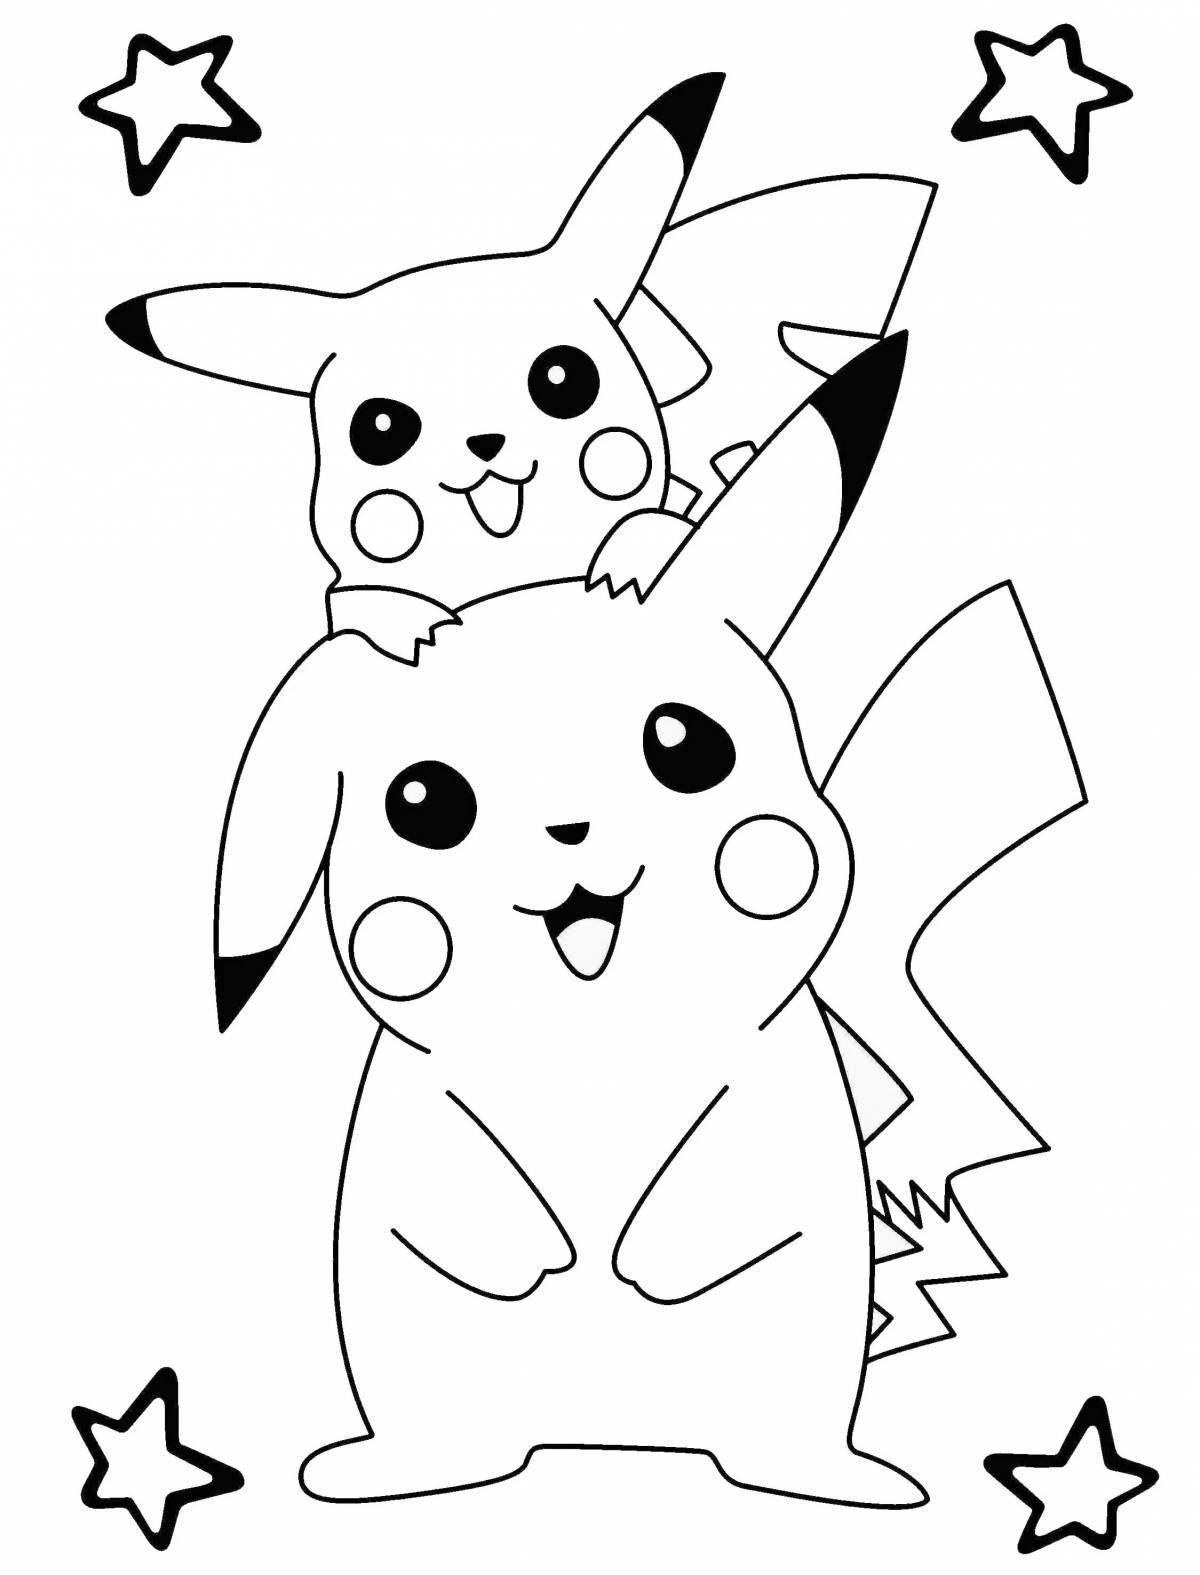 Pikachu live coloring page